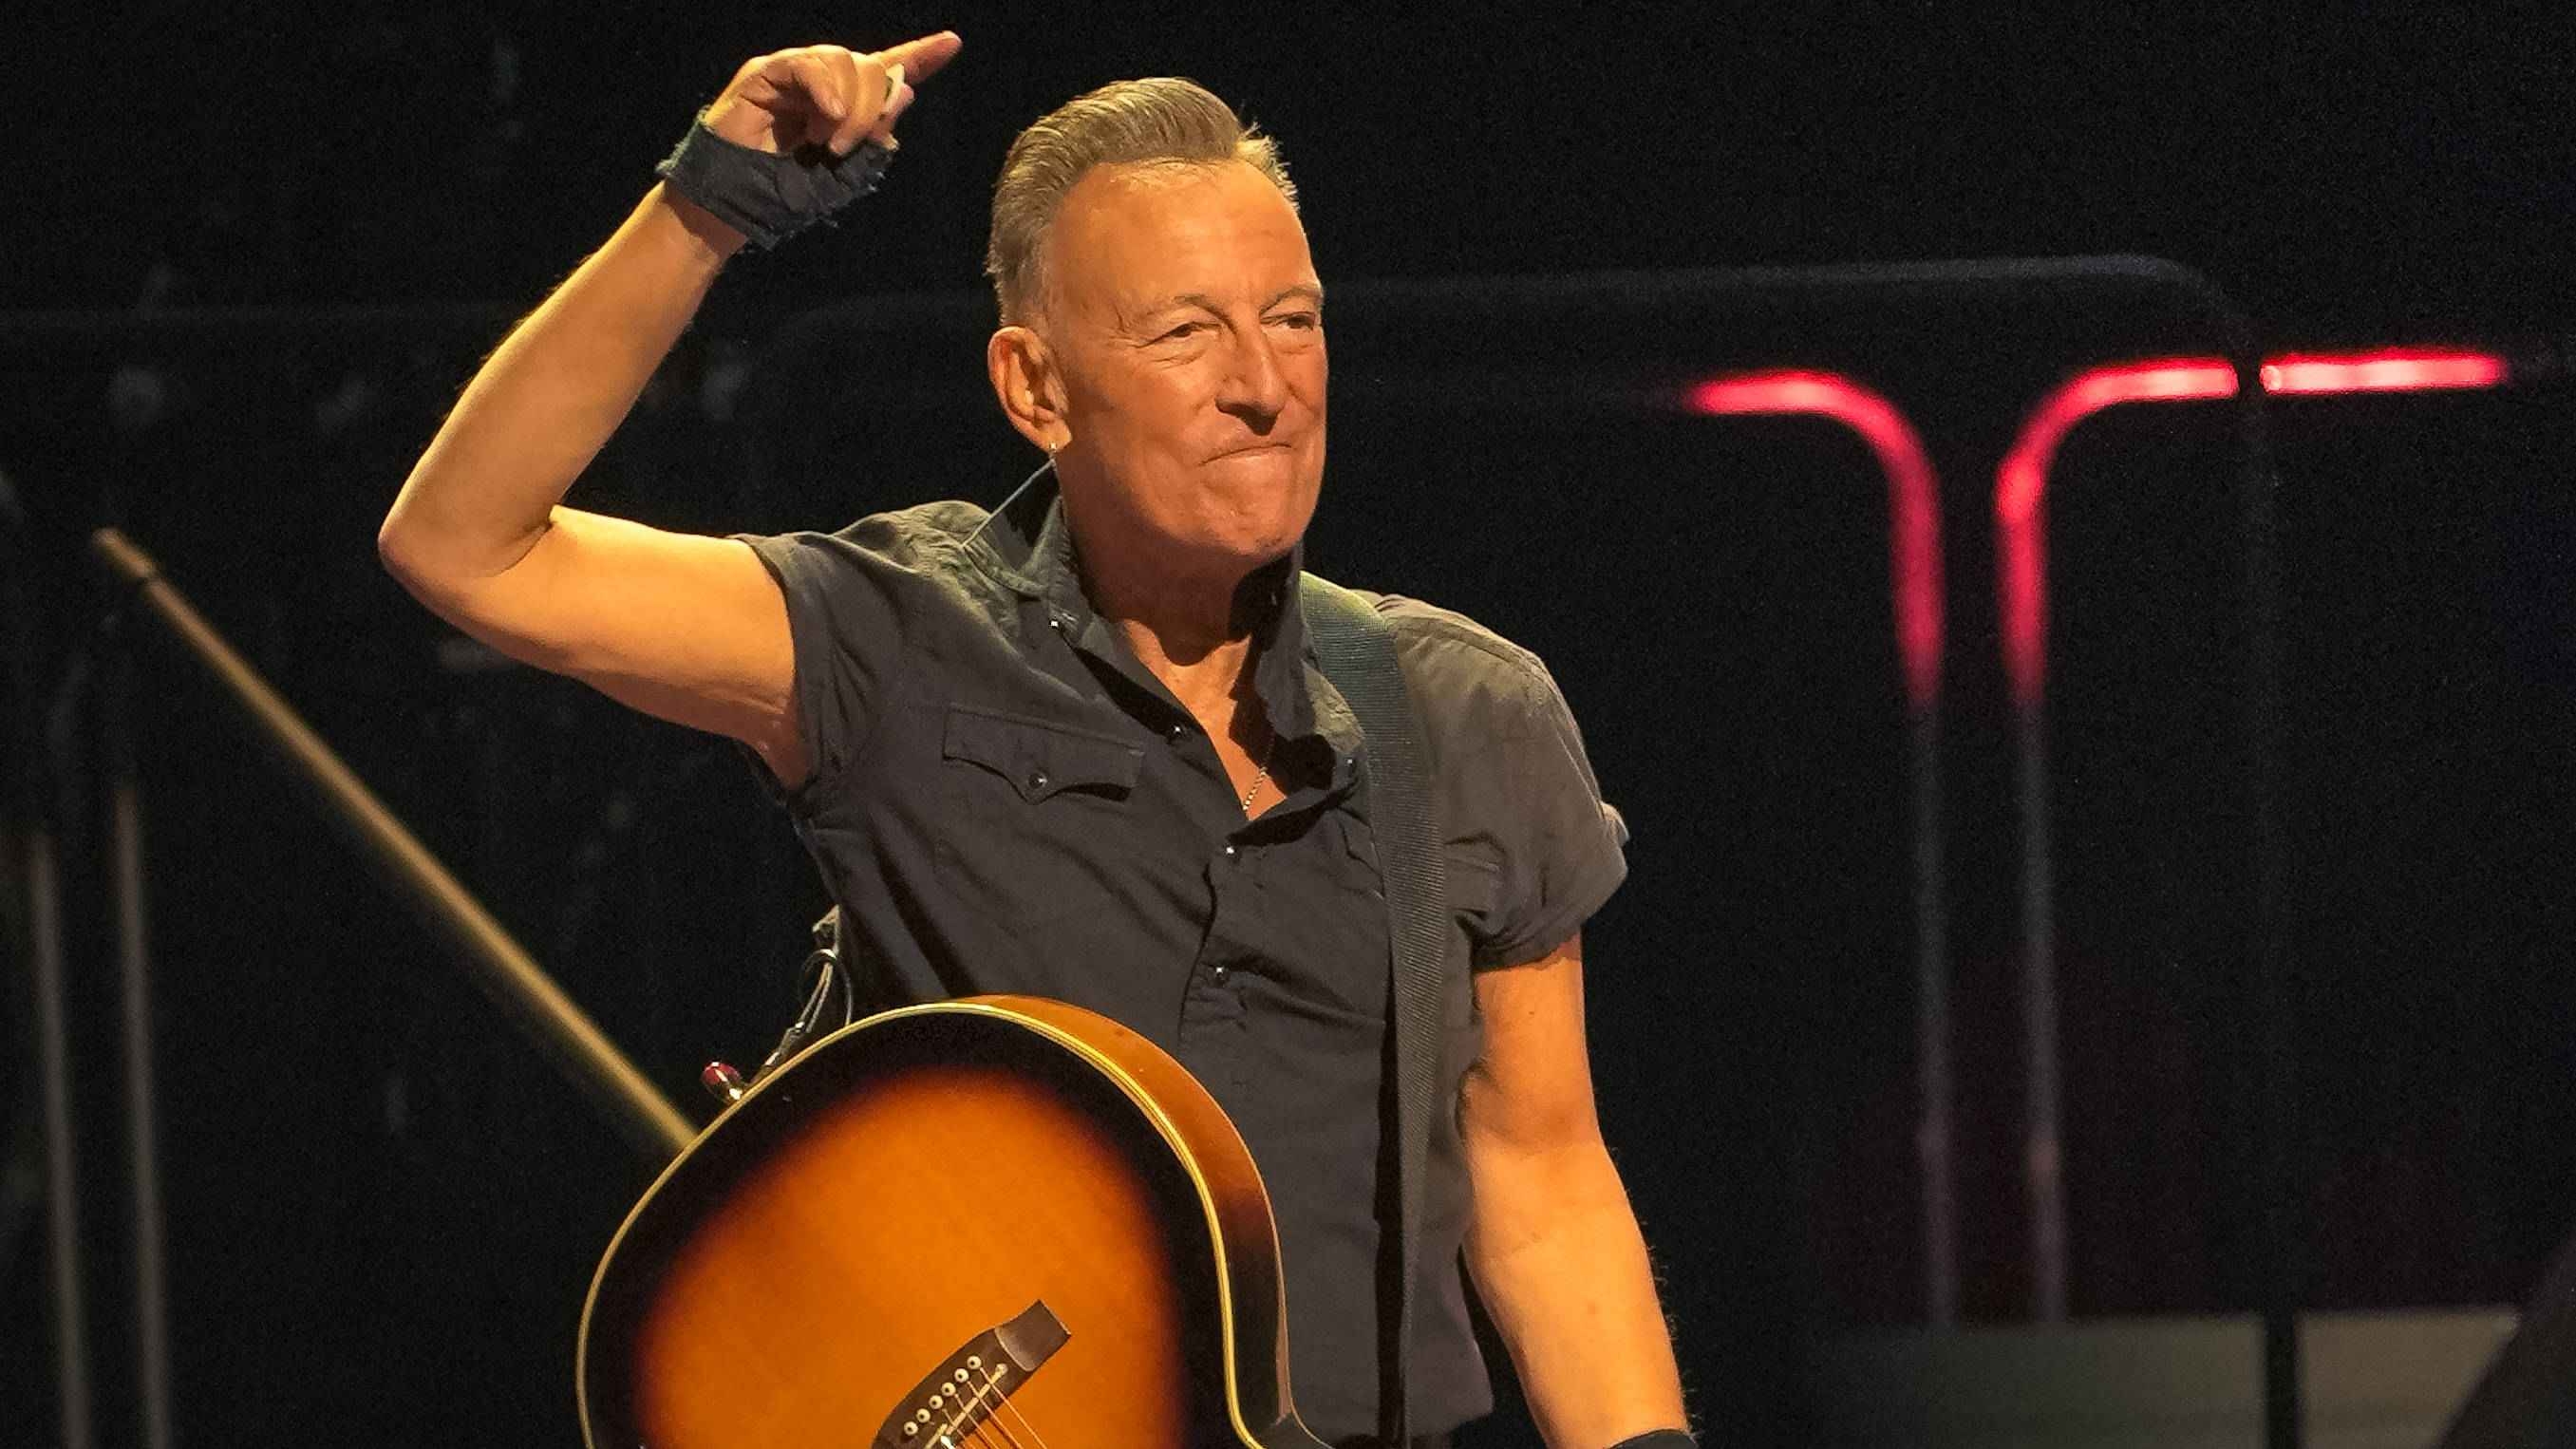 Neues zum Casting des Bruce Springsteen Projekt: “Deliver me from Nowhere”